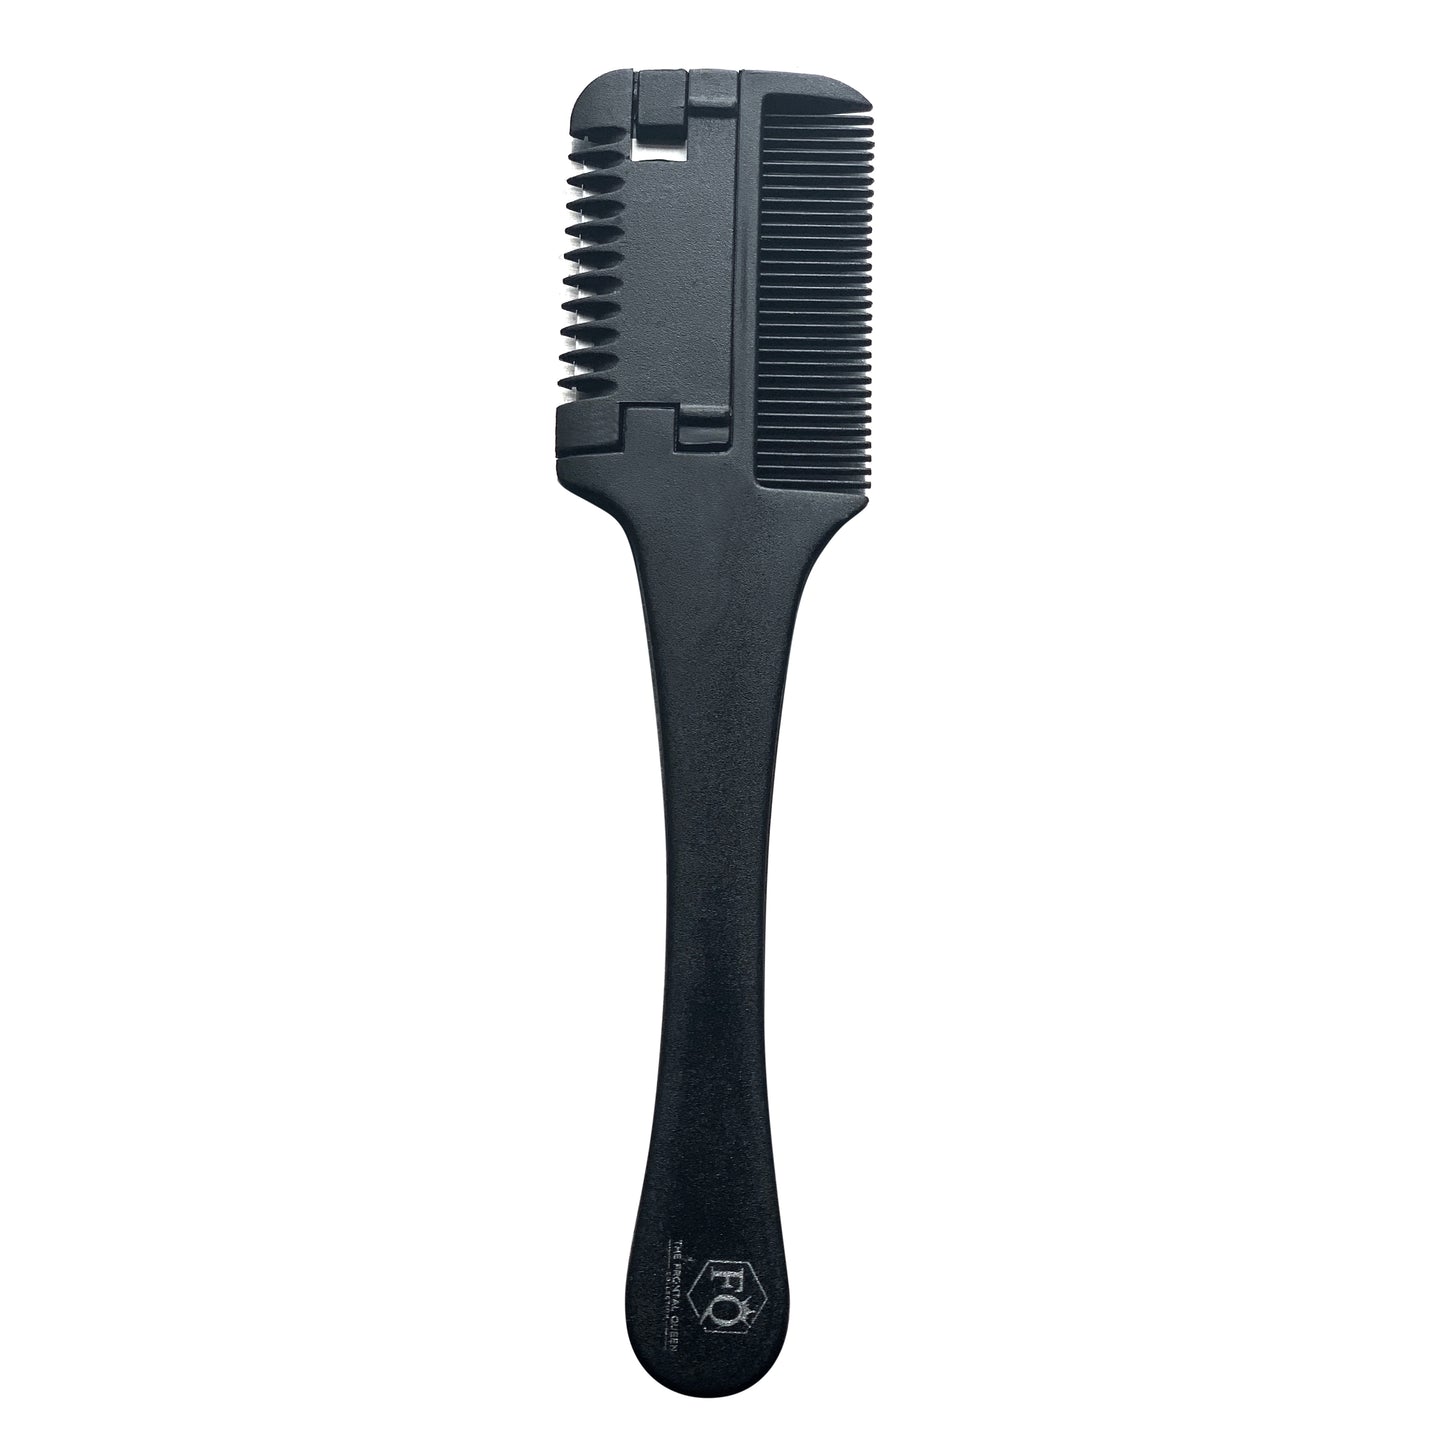 Professional Styling Razor Comb - The Frontal Queen